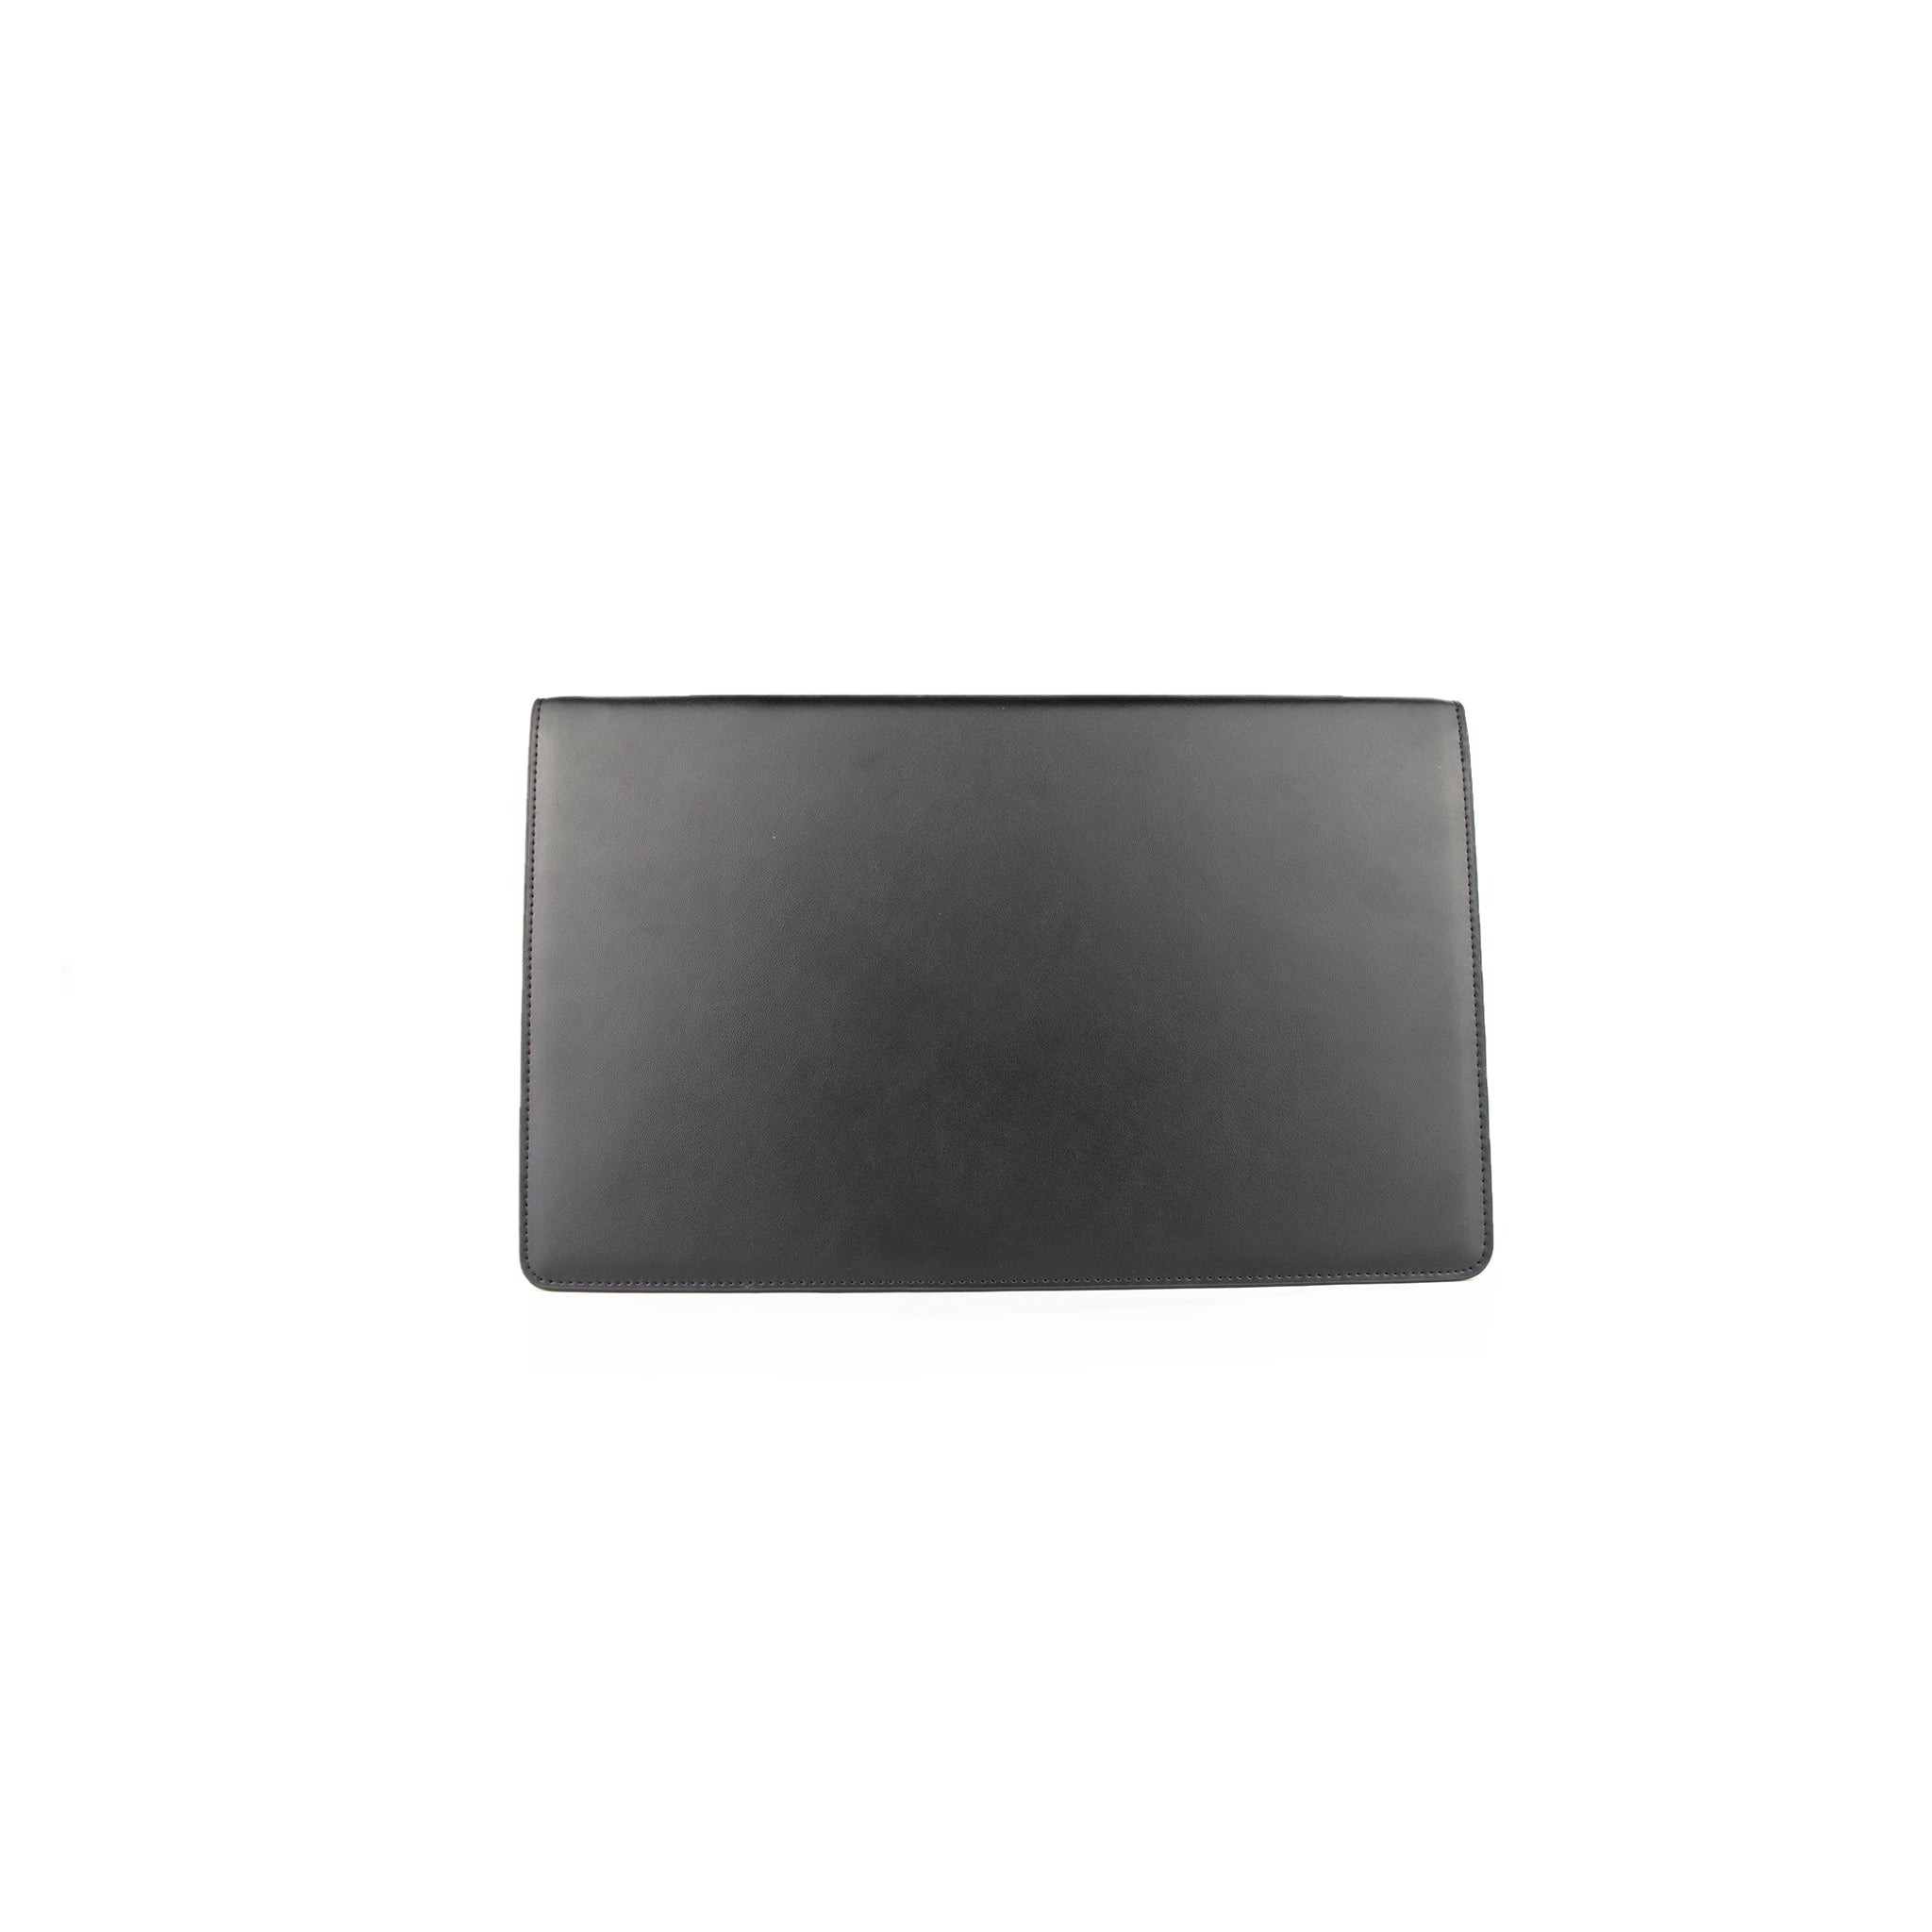 Personalised Envelope Clutch Bag - Black with Grey Smooth Leather